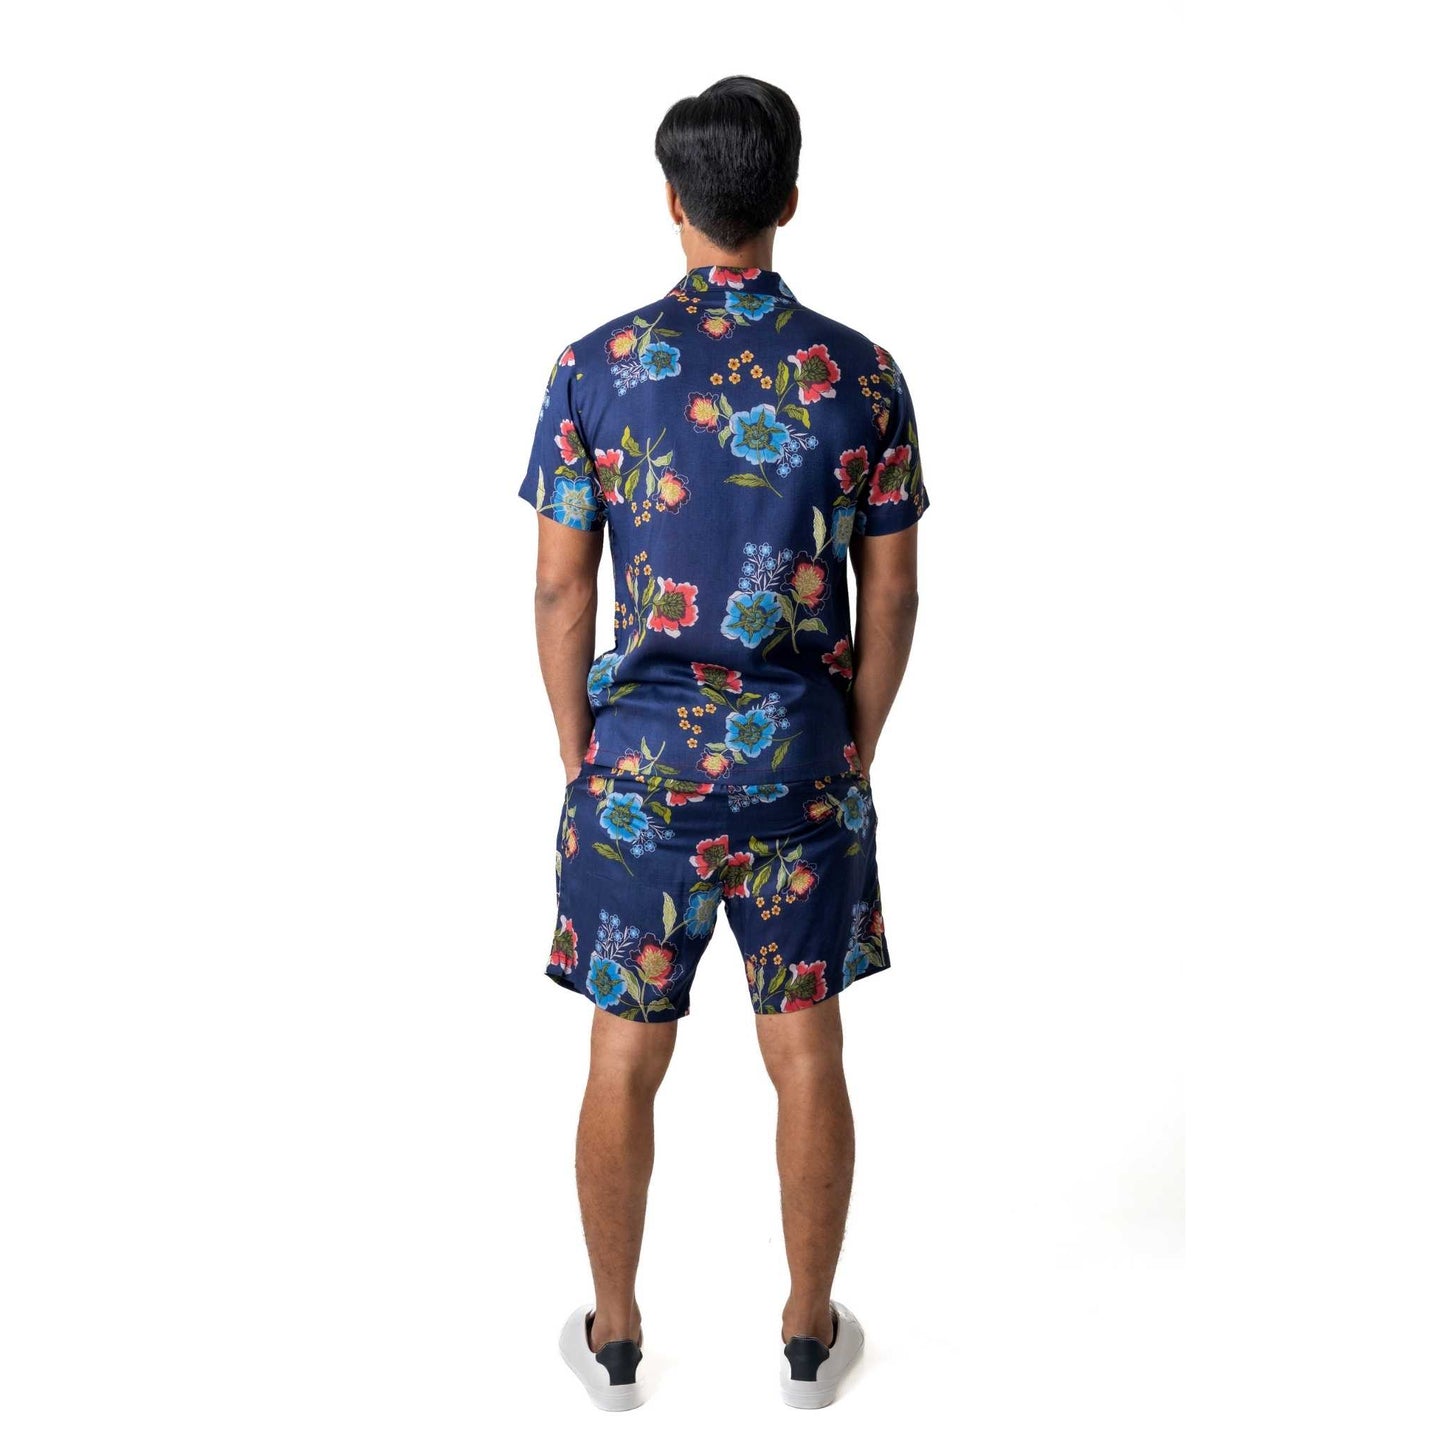 Shirt and shorts co-ords in floral print